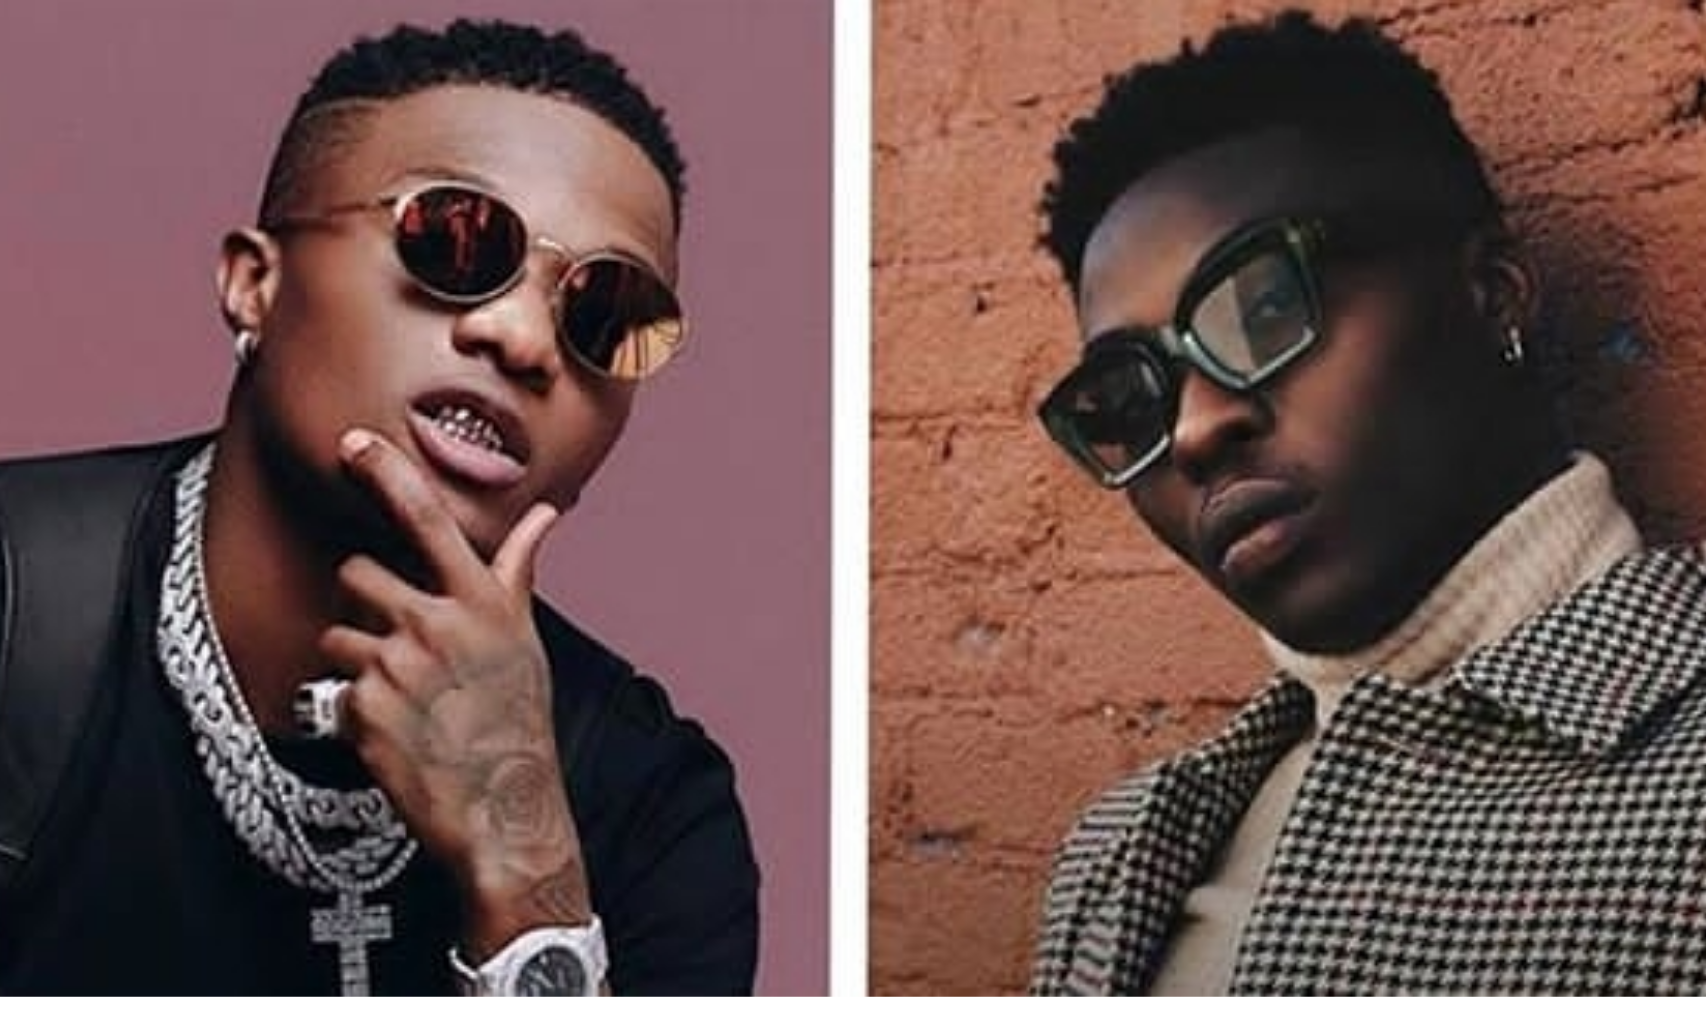 Wizkid blasts Reekado Banks for trying to release their old song amid #EndSars protest